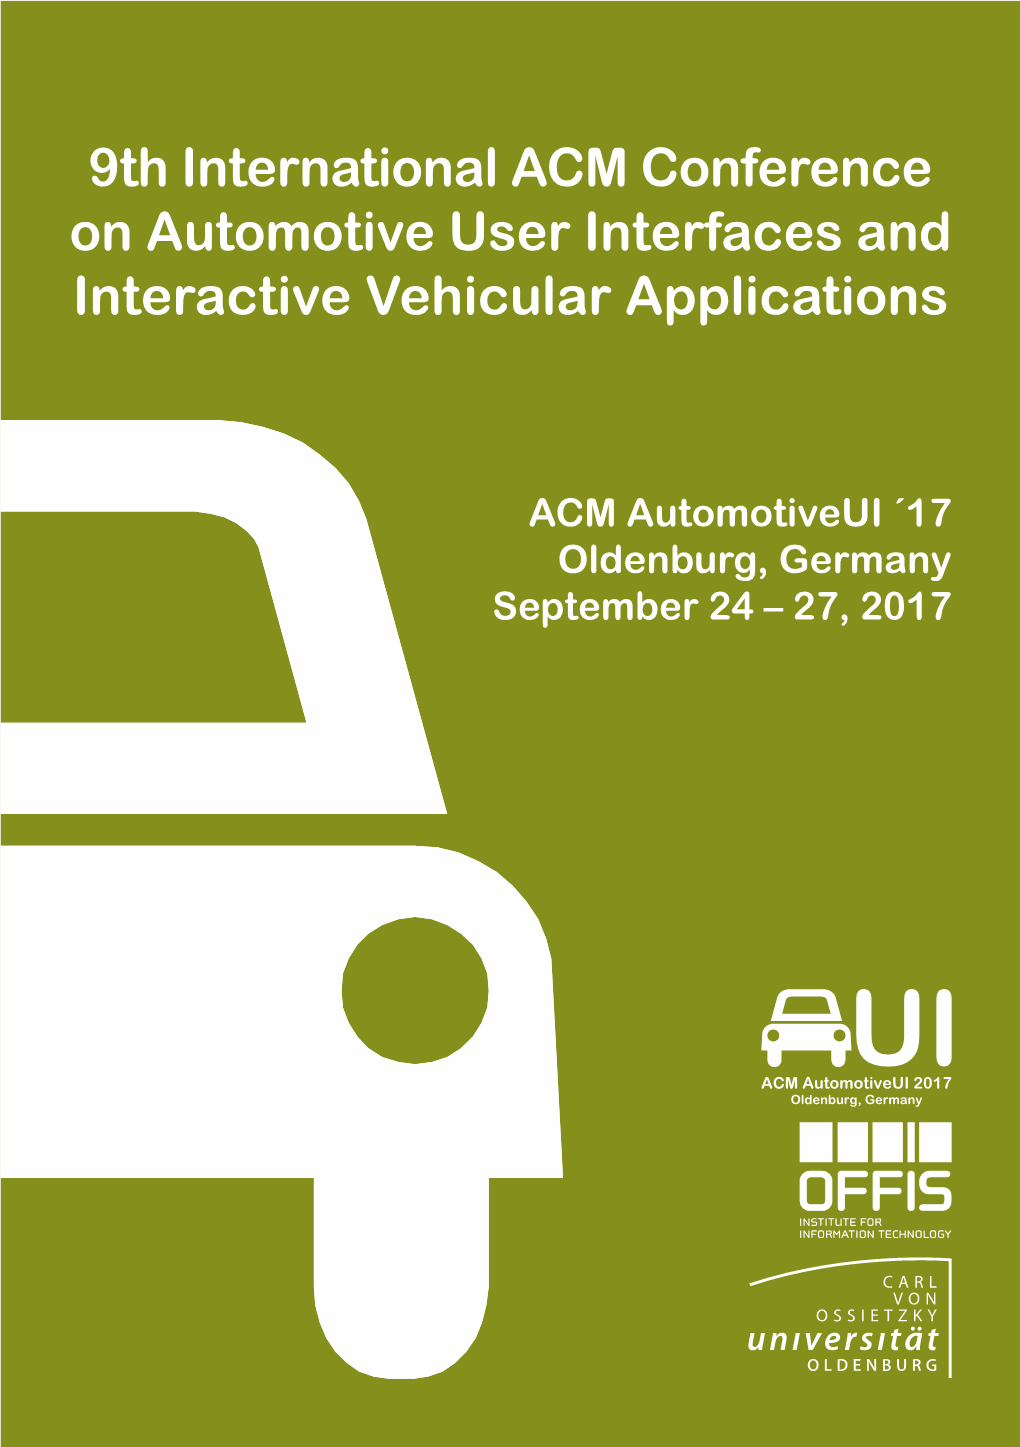 9Th International ACM Conference on Automotive User Interfaces and Interactive Vehicular Applications